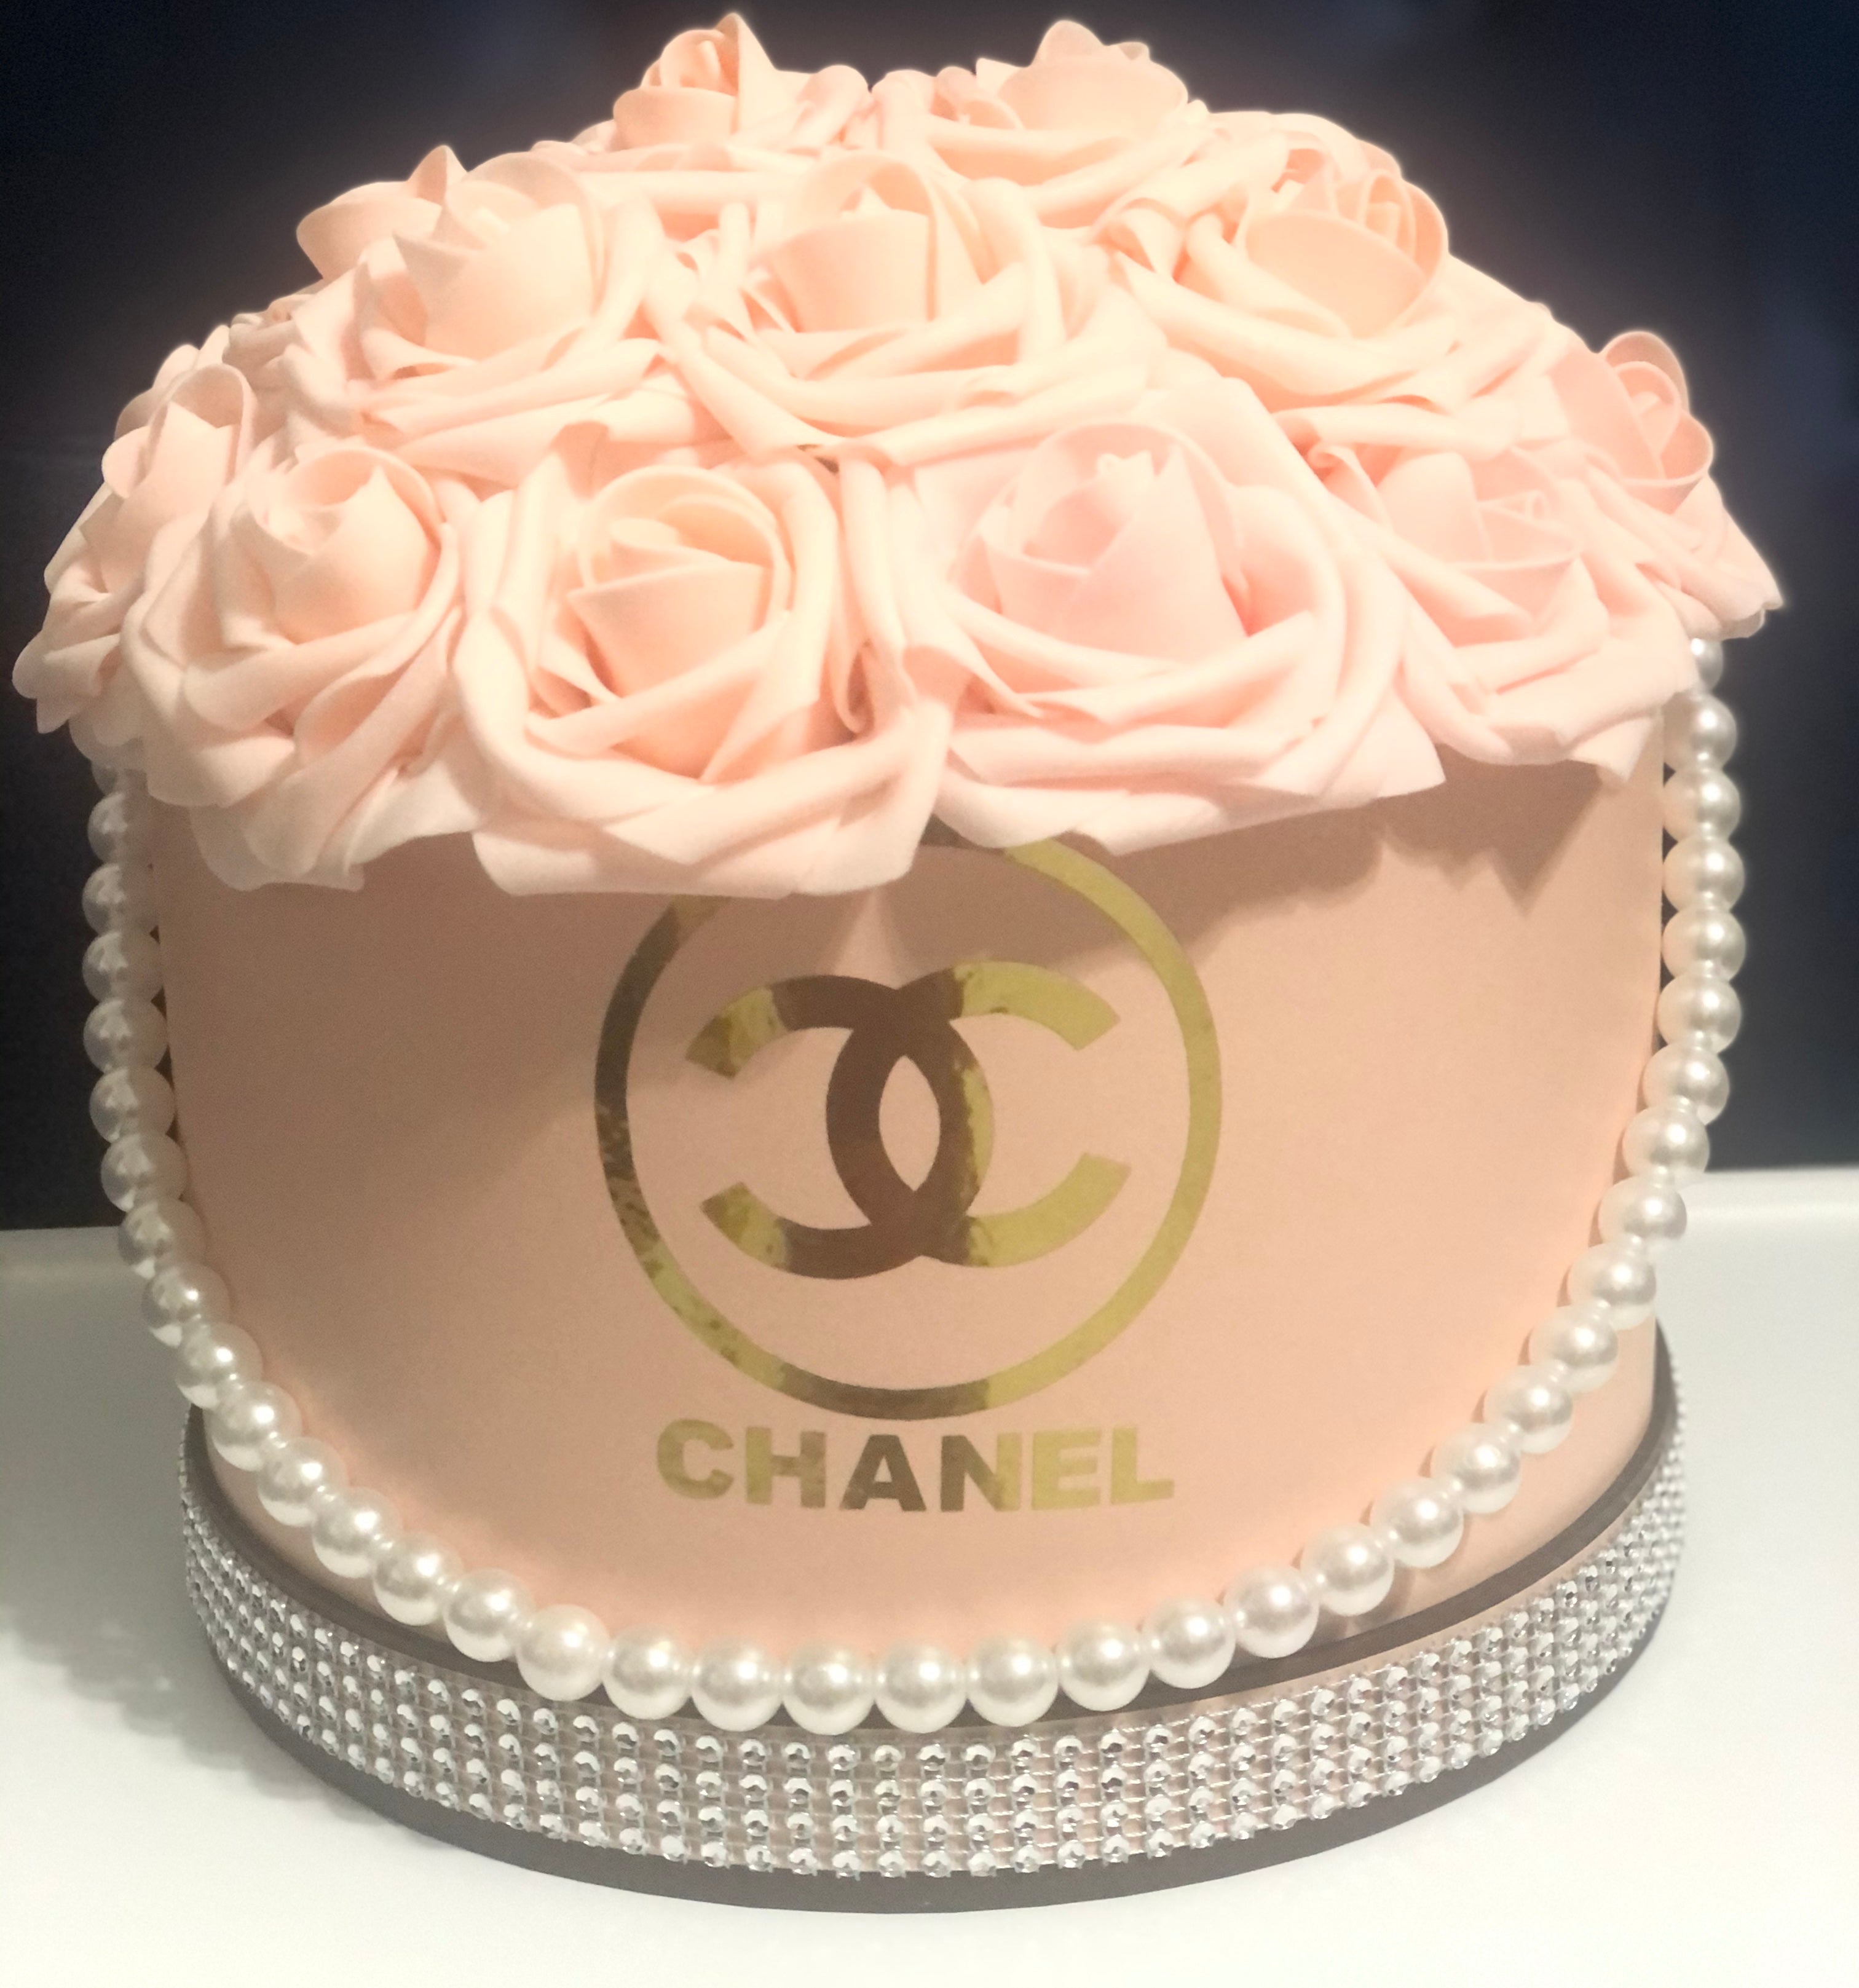 MY CHANEL FLOWER BOX - Queen Of All You See